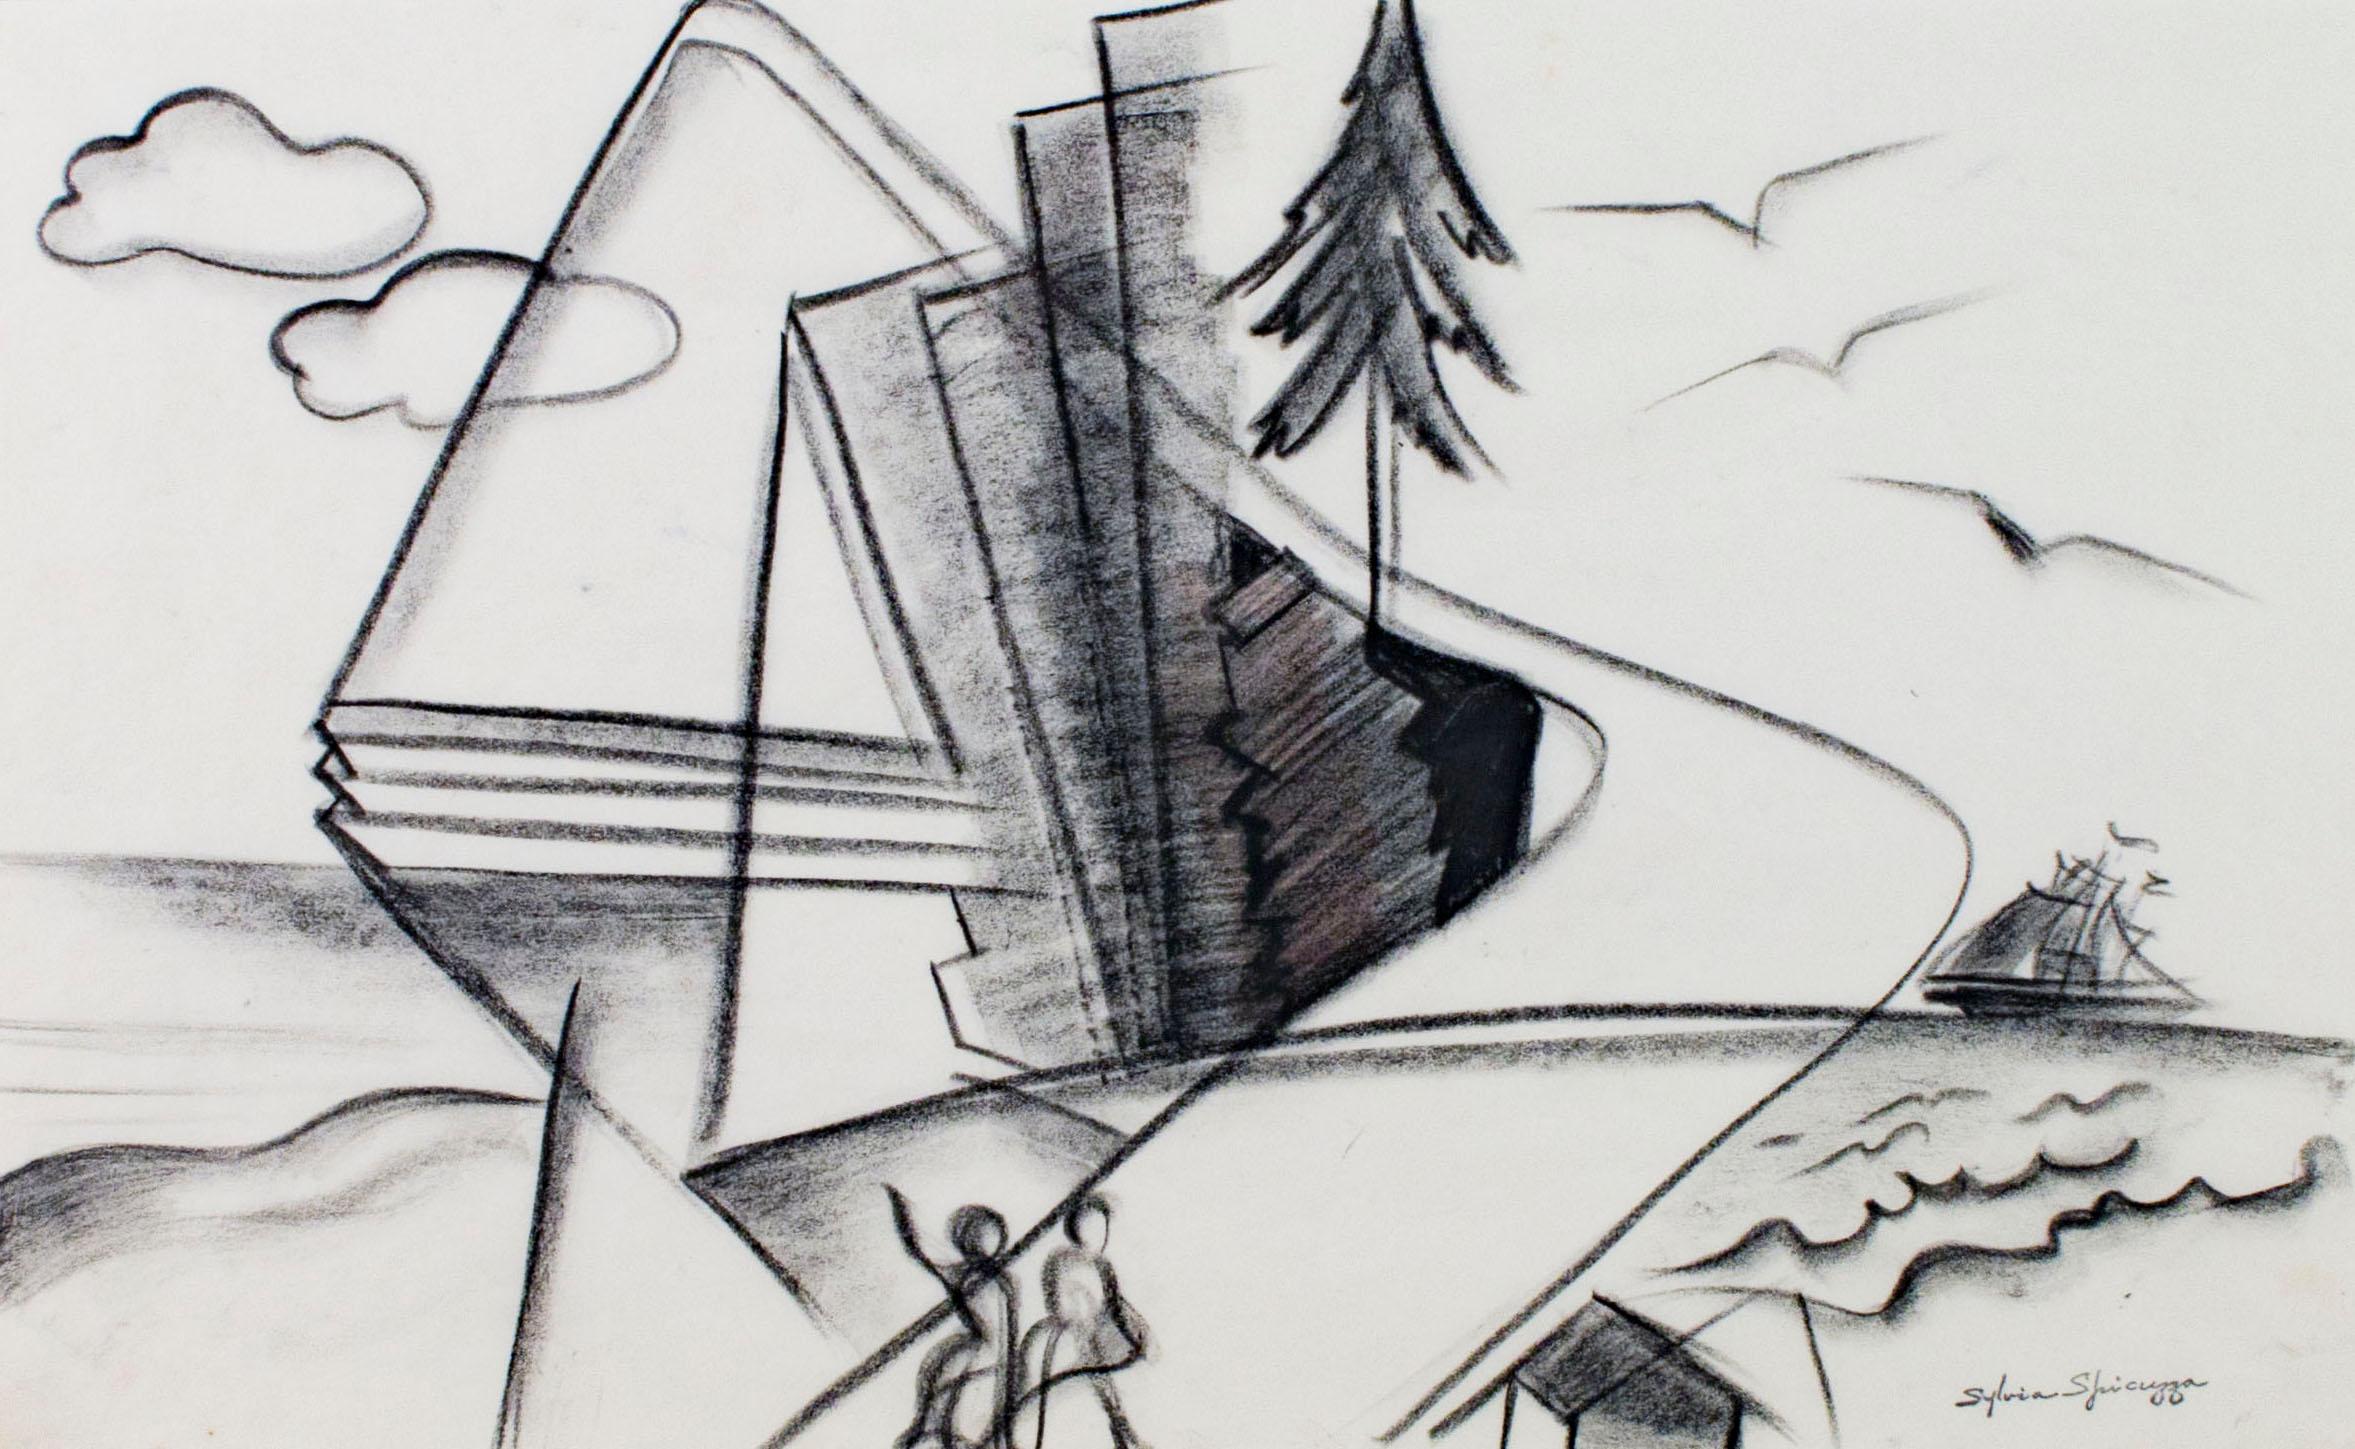 "Downtown Lakefront" original conte cubist drawing by Sylvia Spicuzza